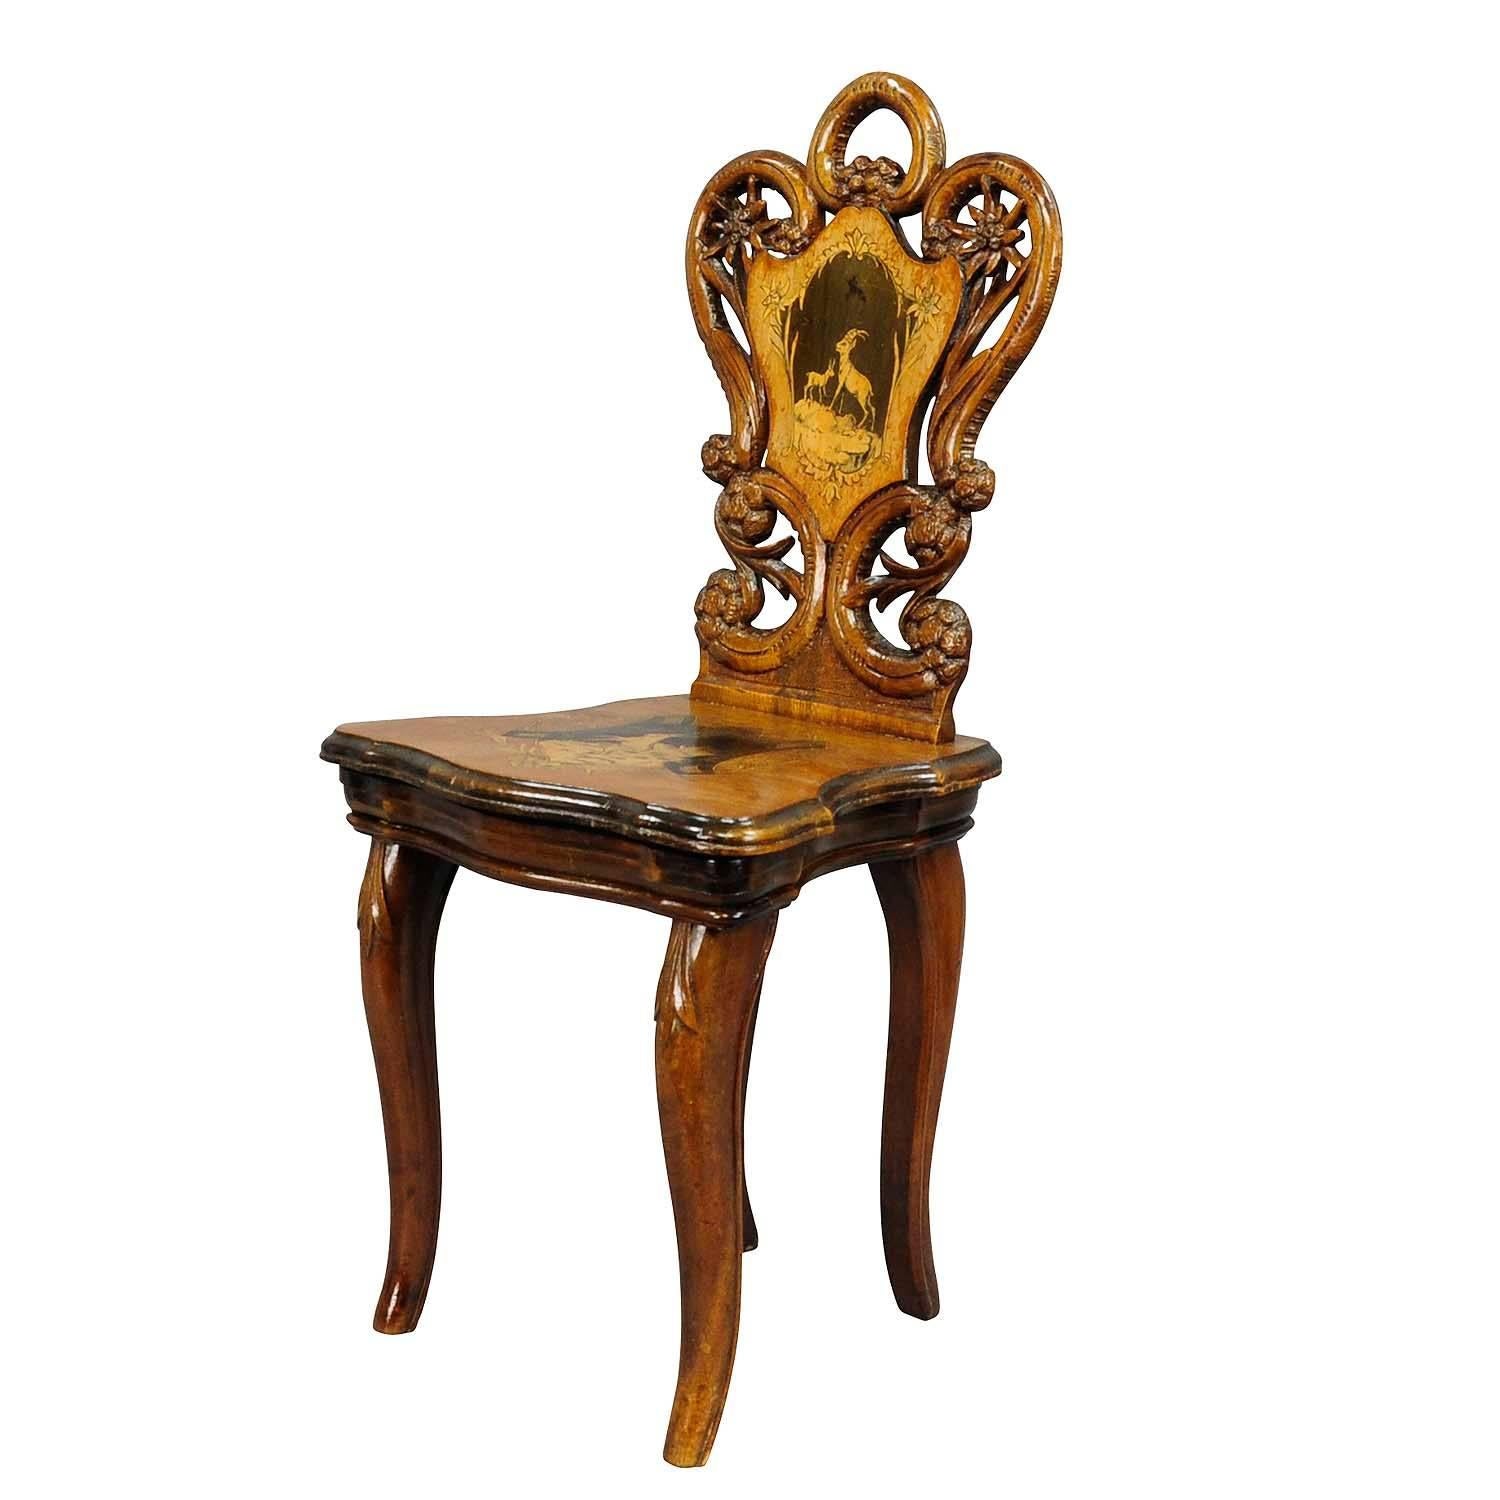 Carved and Inlaid Walnut Children Chair with Musical Work, Swiss, 1900